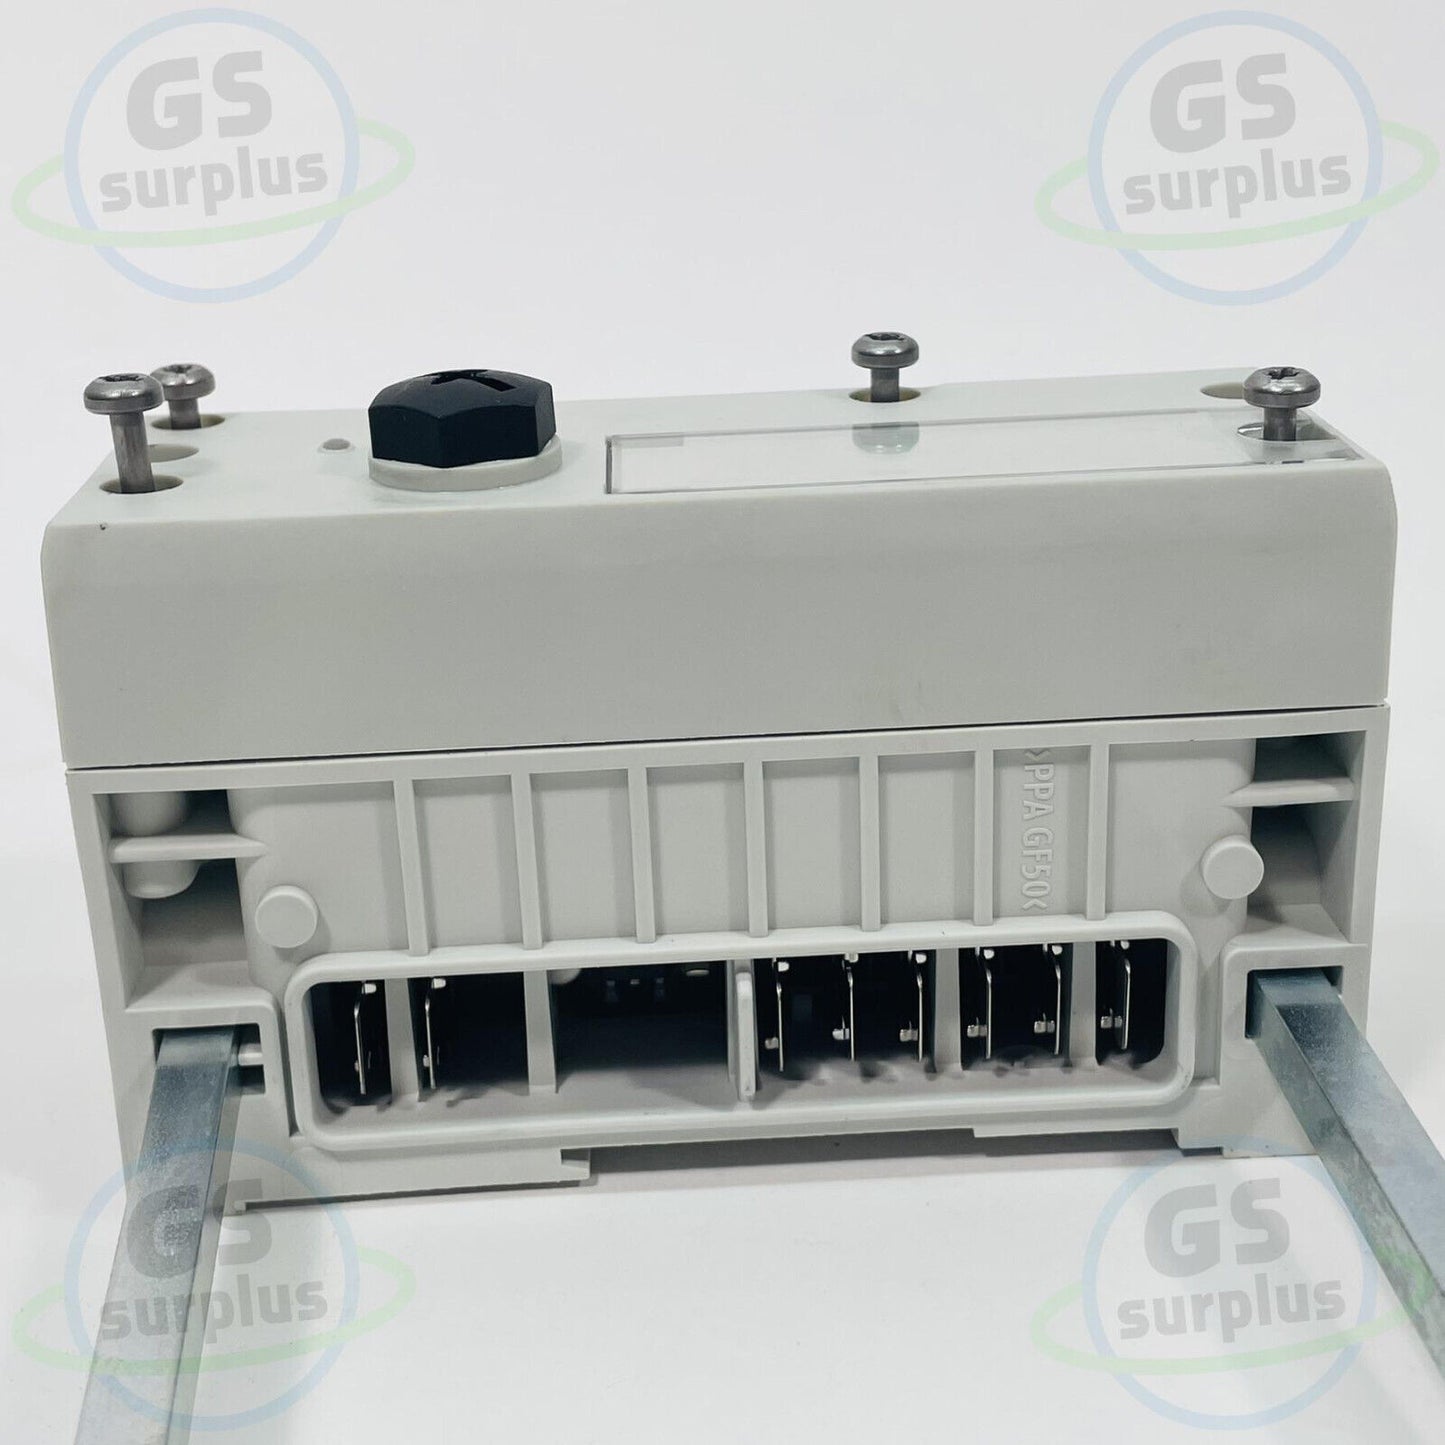 New Festo 570783 VMPAL-EPL-CPX End Plate